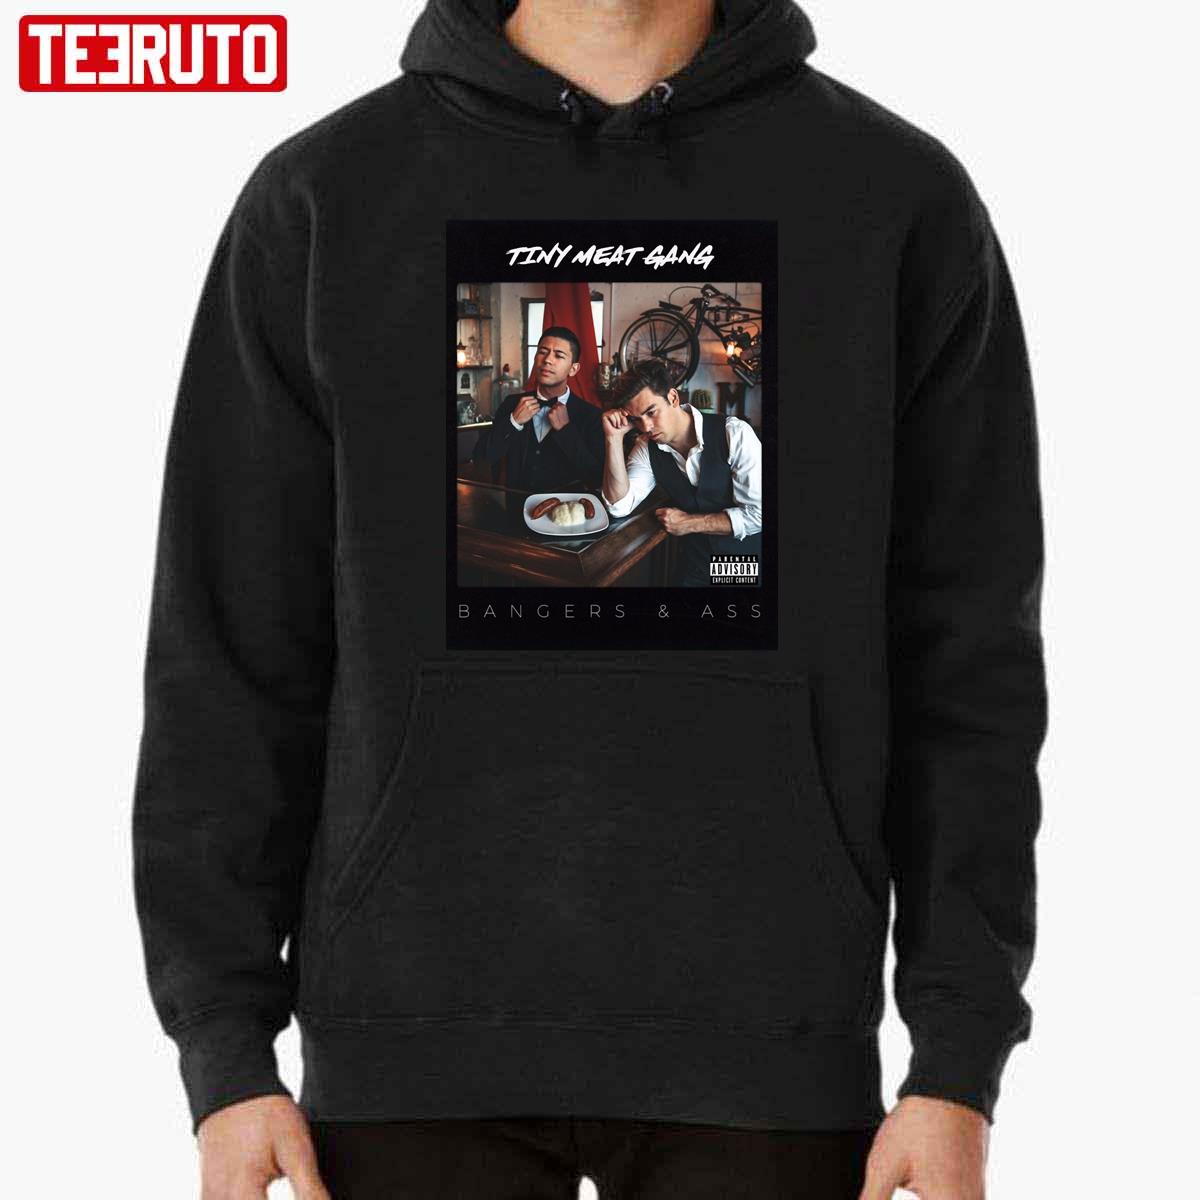 Tiny Meat Gang Bangers And Ass Unisex Sweatshirt